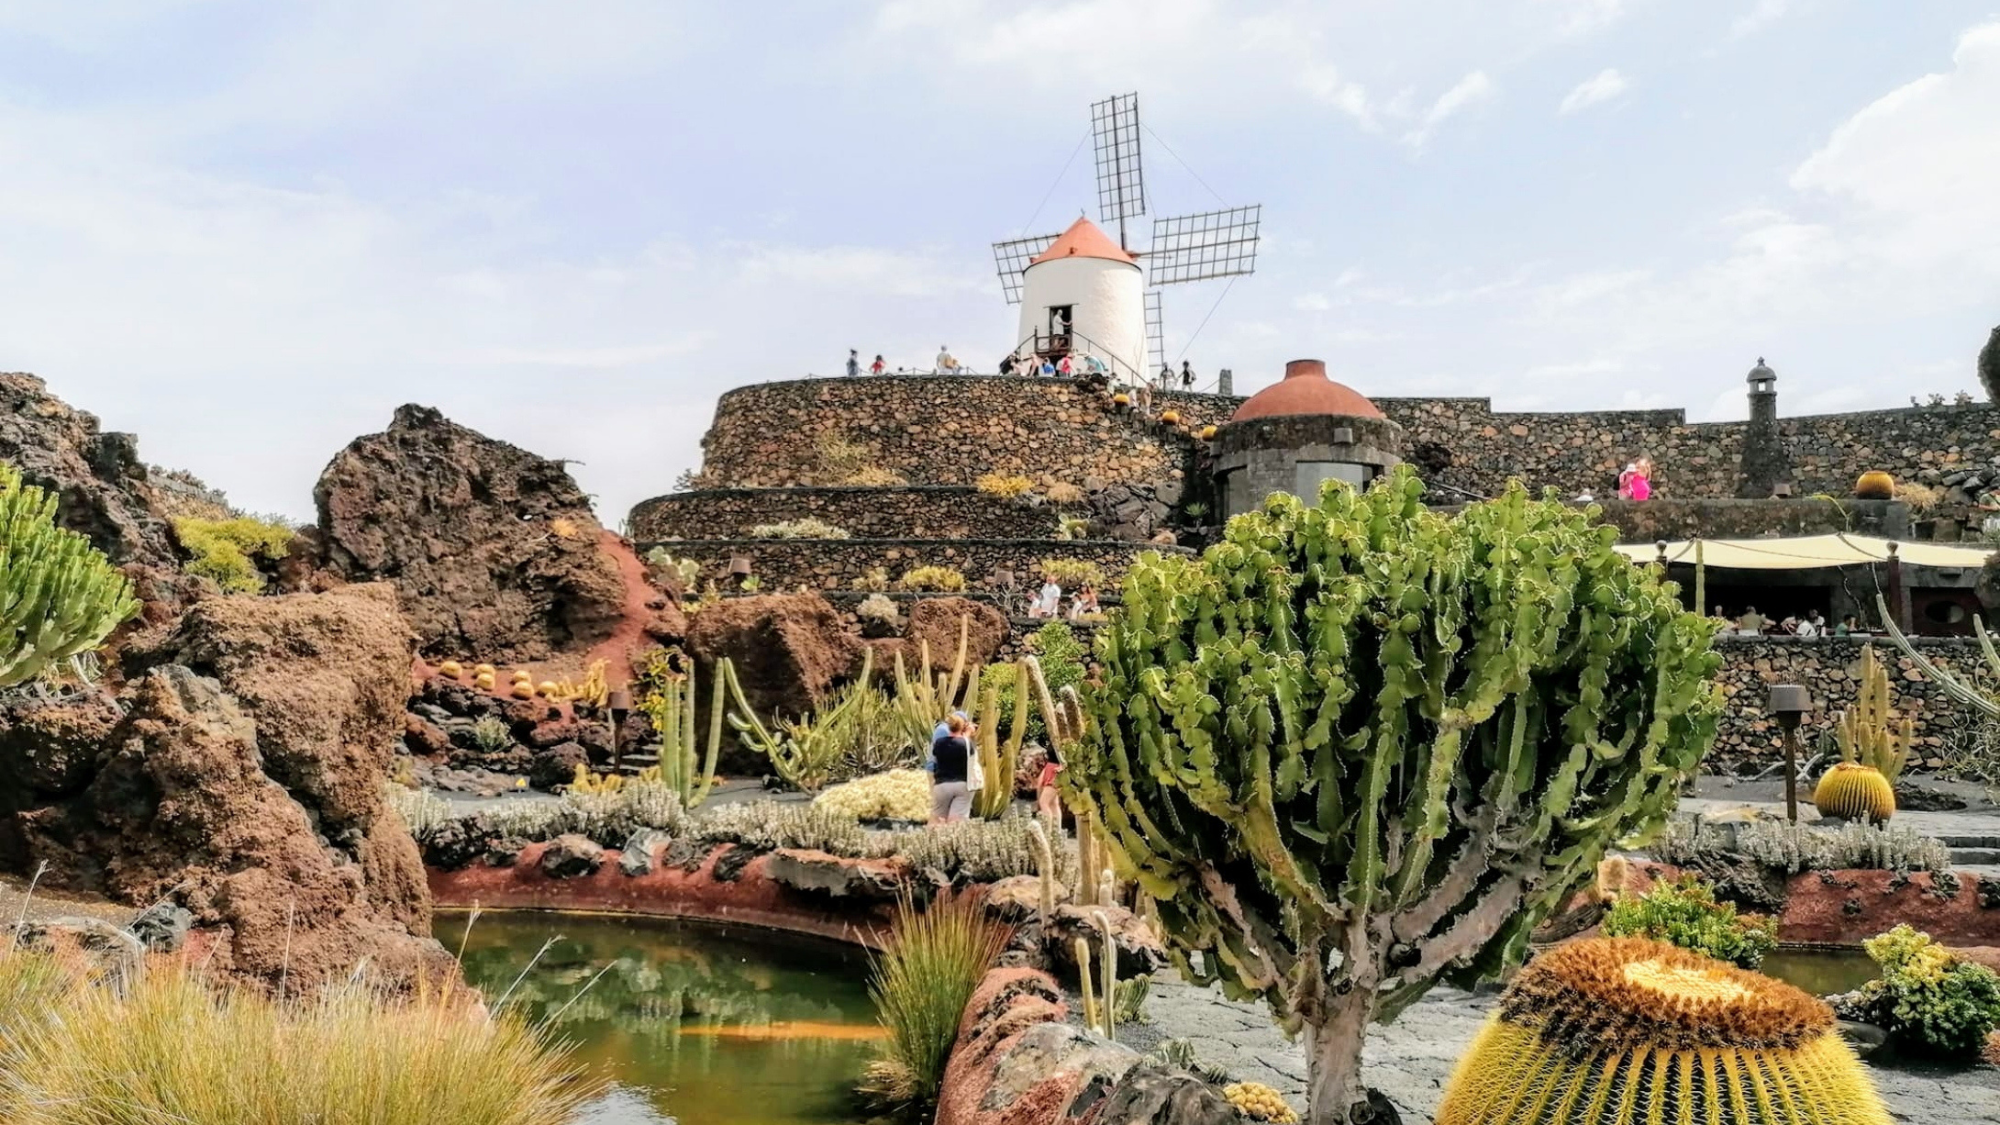 The Jardin de Cactus in Lanzarote, with hundreds of plants and a small white windmill